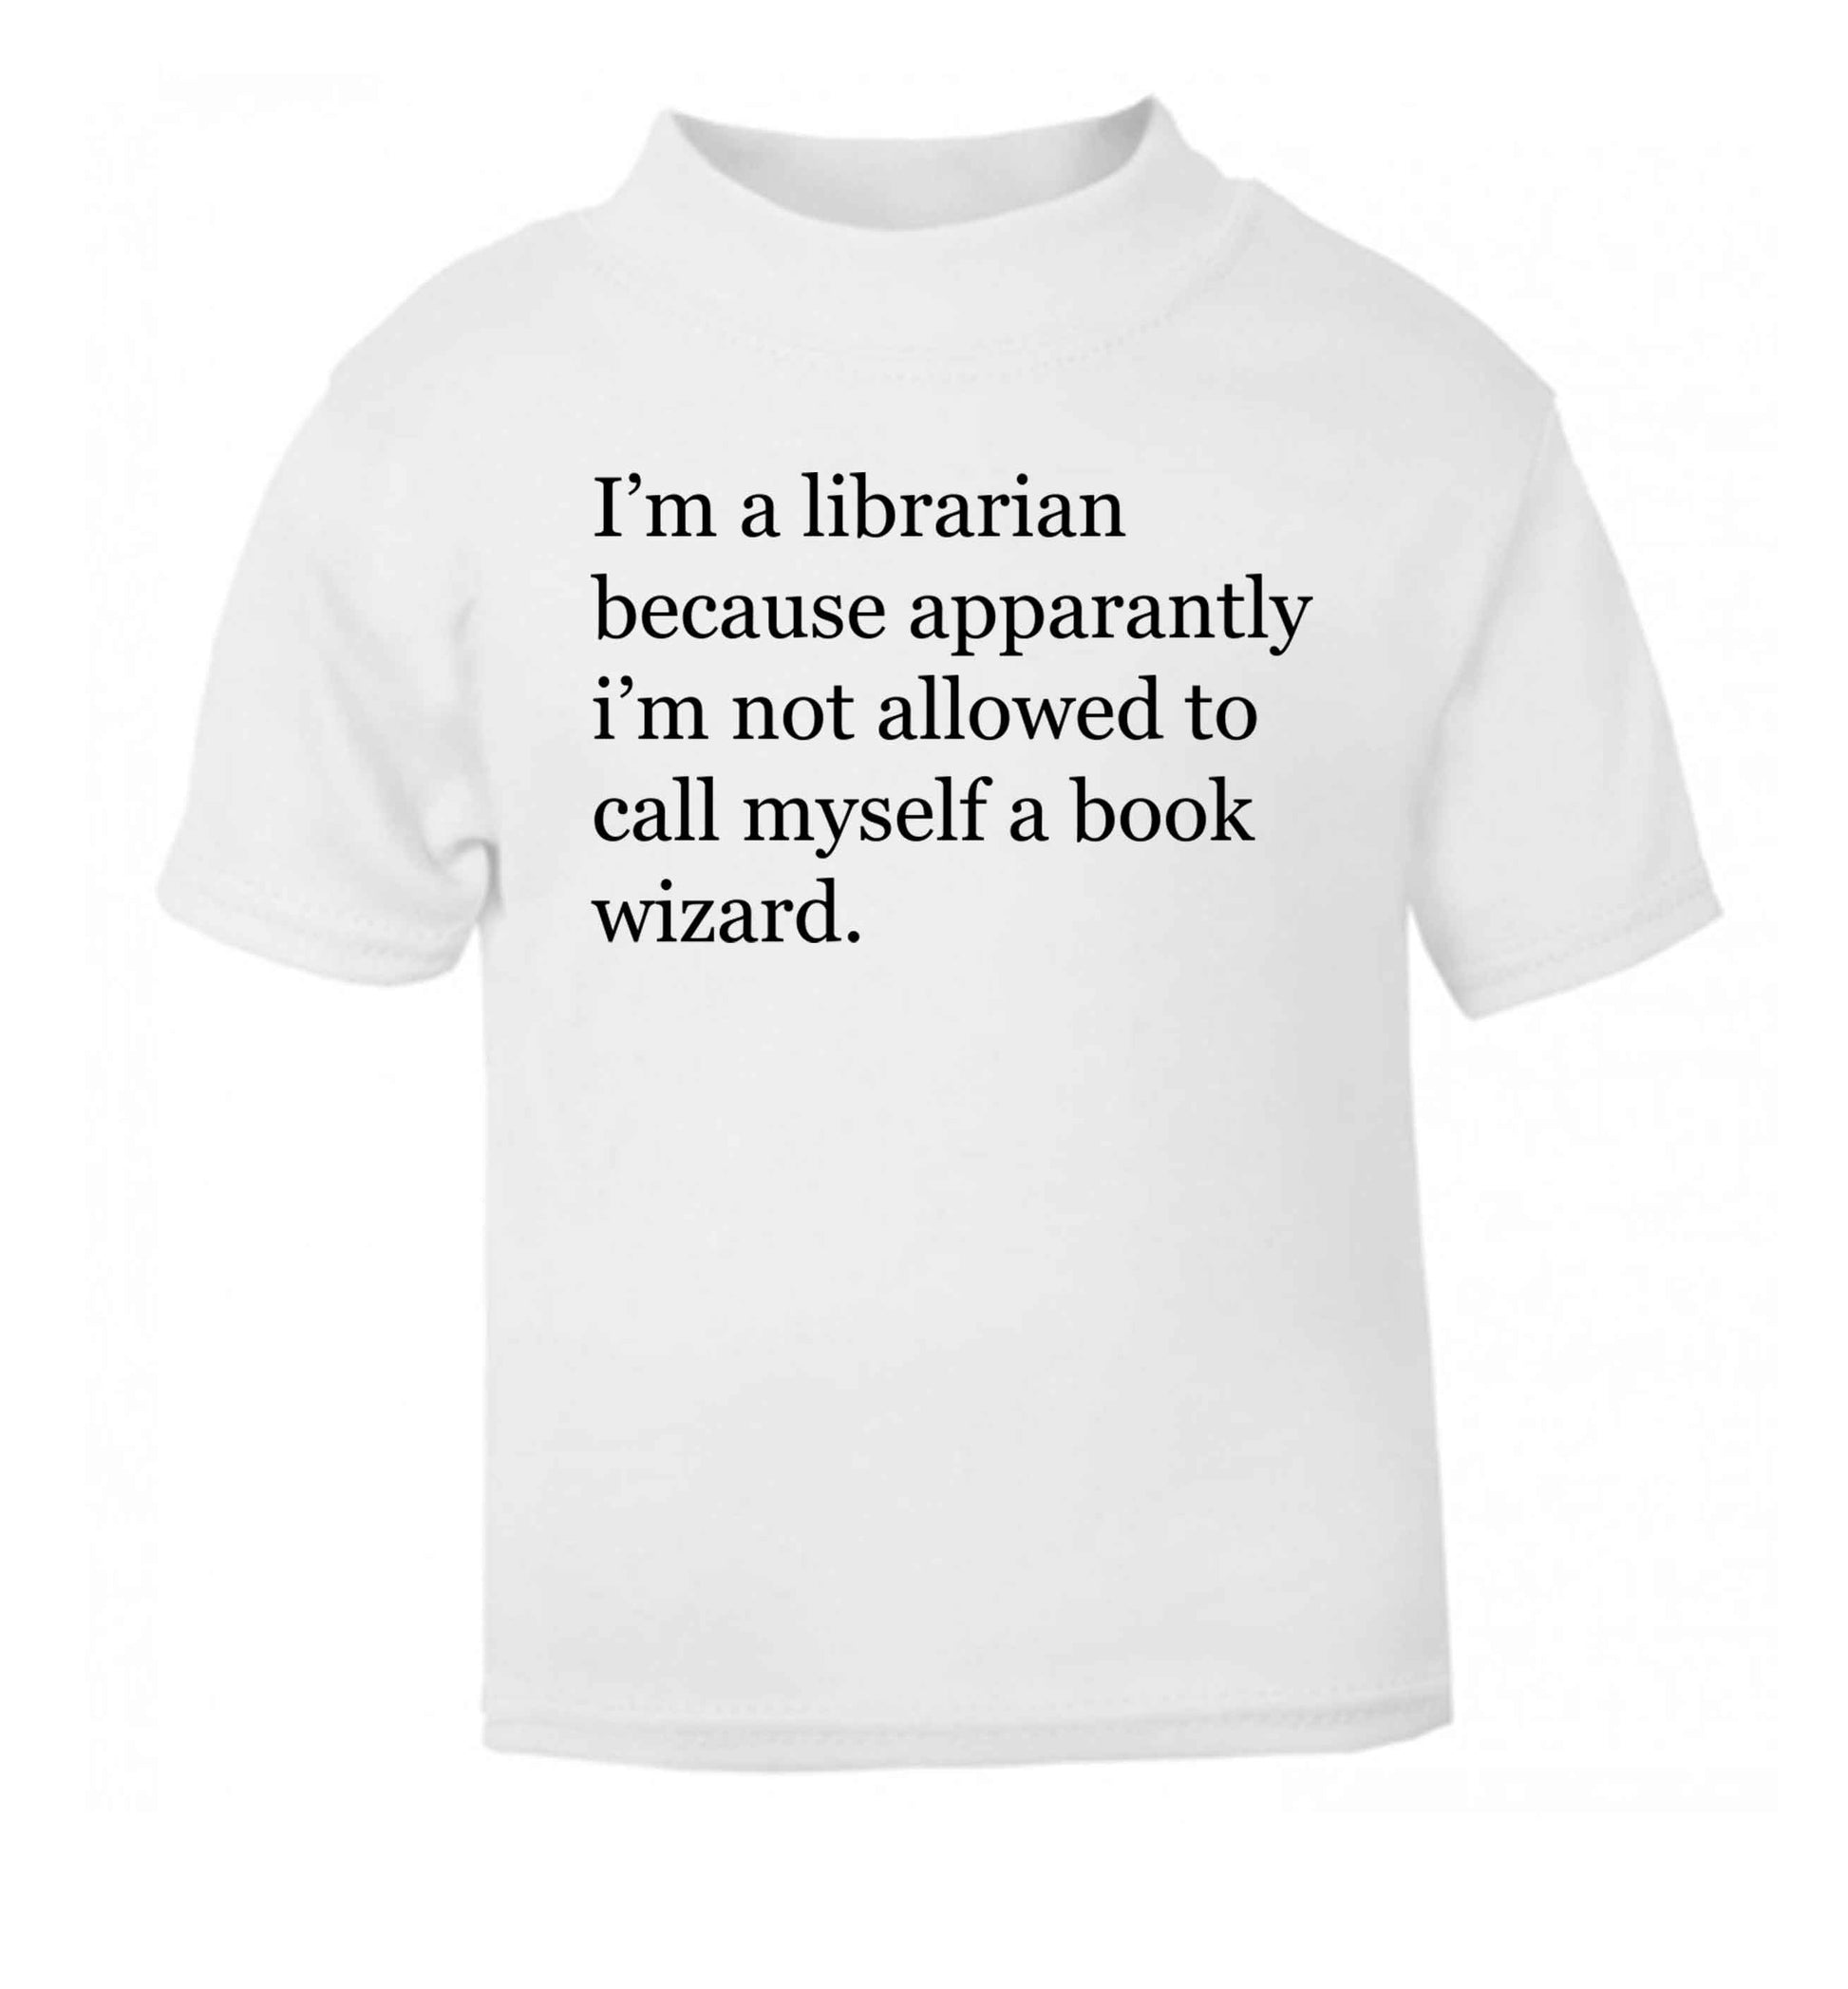 iÕm a librarian because apparantly iÕm not allowed to call myself a book wizard white Baby Toddler Tshirt 2 Years